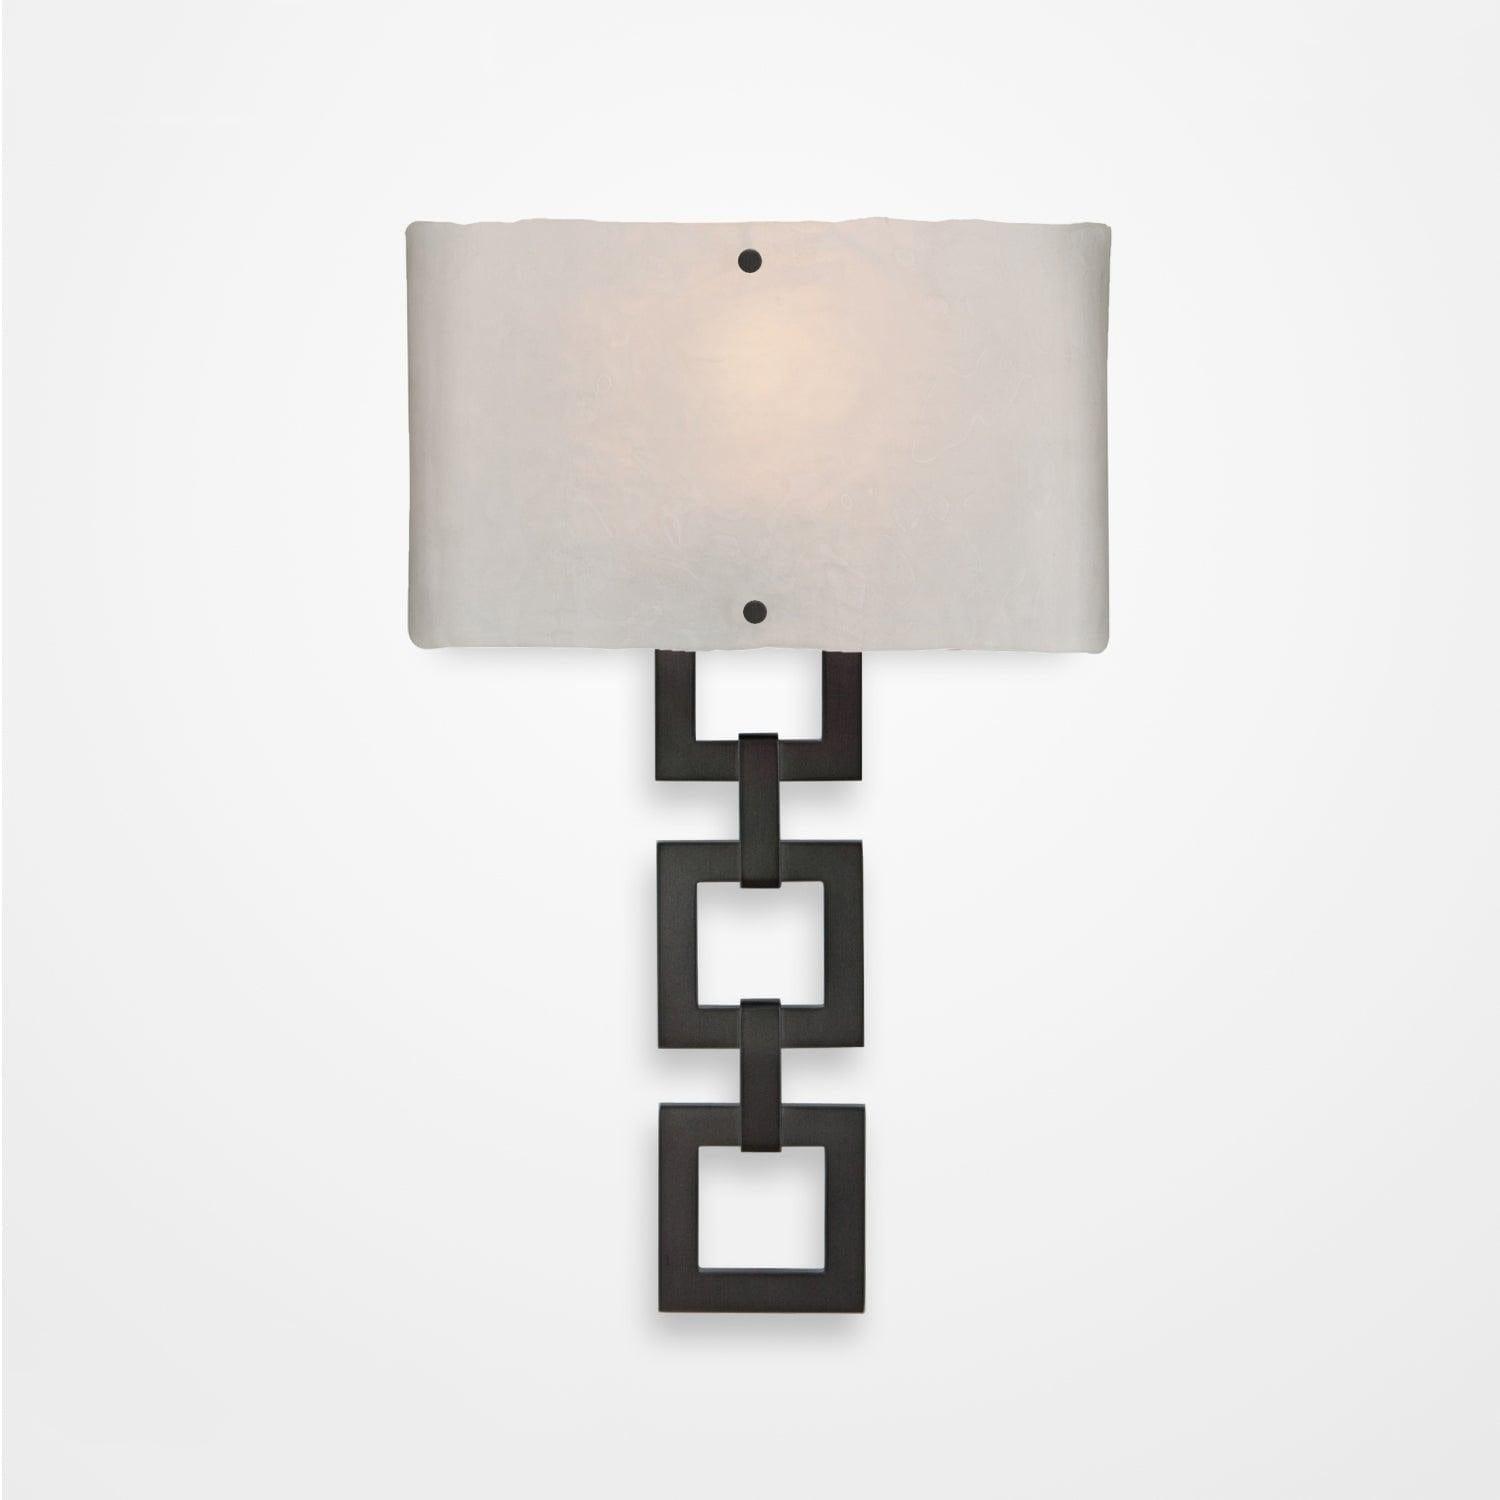 Hammerton Studio - Carlyle Square Link Cover Sconce - CSB0033-0B-GM-FG-E2 | Montreal Lighting & Hardware